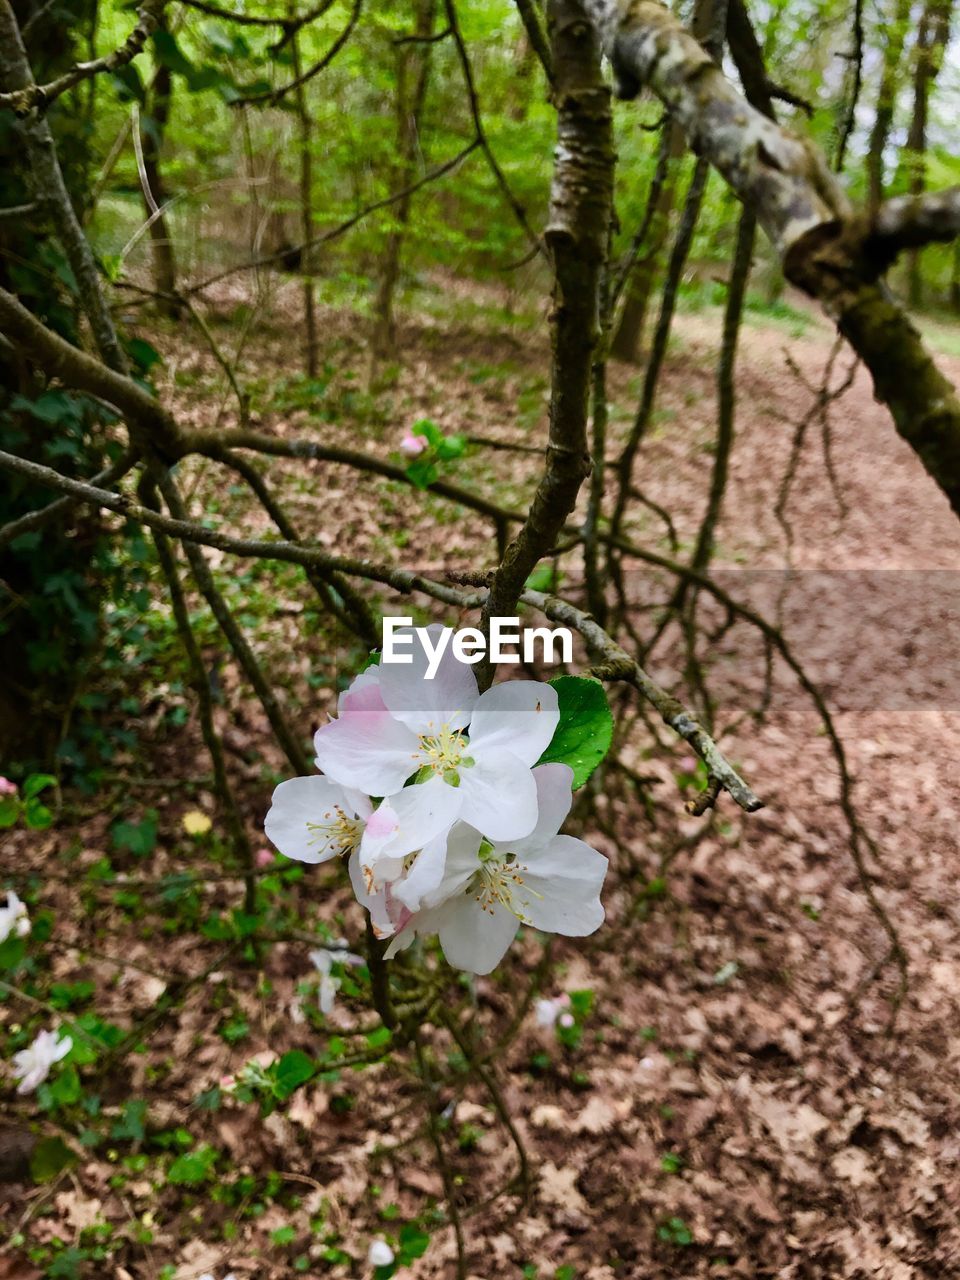 CLOSE-UP OF FLOWER TREE GROWING IN FOREST